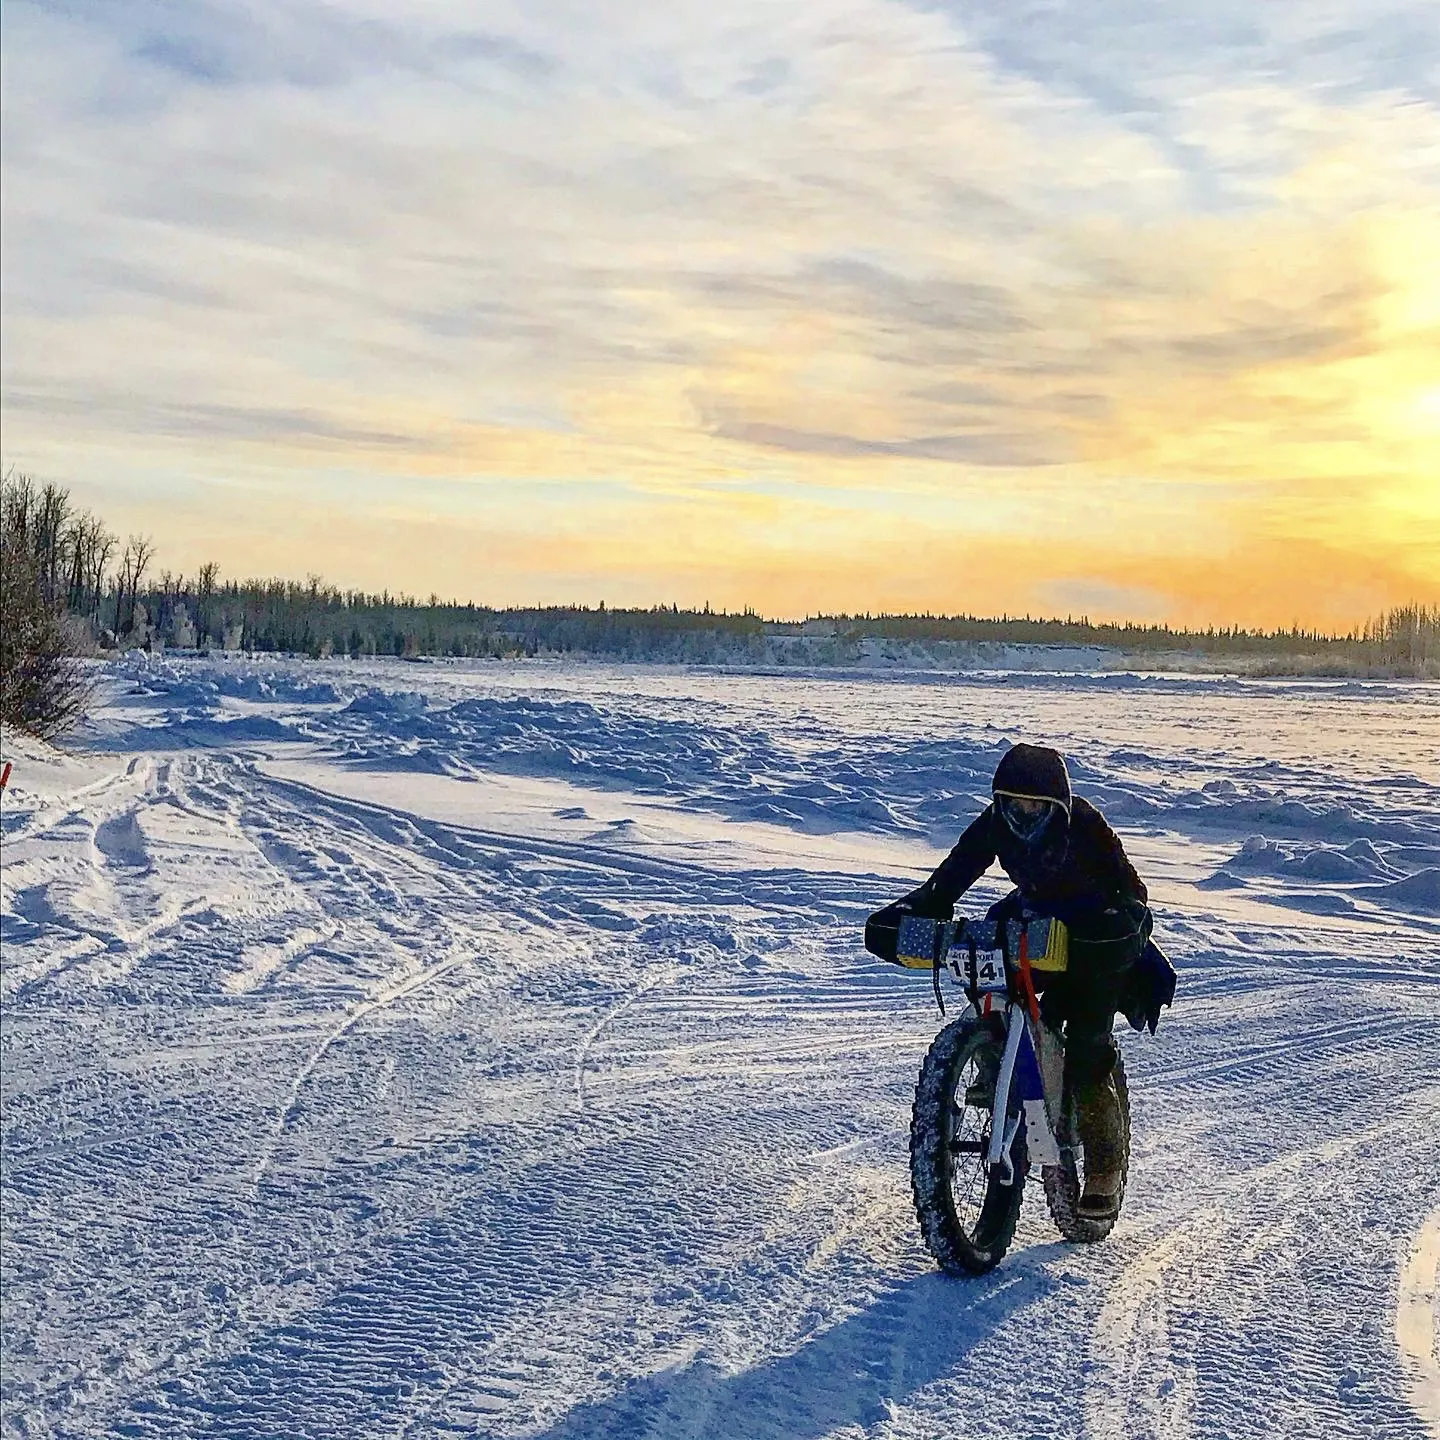 A cyclist rides hard packed snow in Alaska. There is a wide expanse of white snow. The cyclist has her head down and is powering through on her Otso Cycles Voytek fat bike.